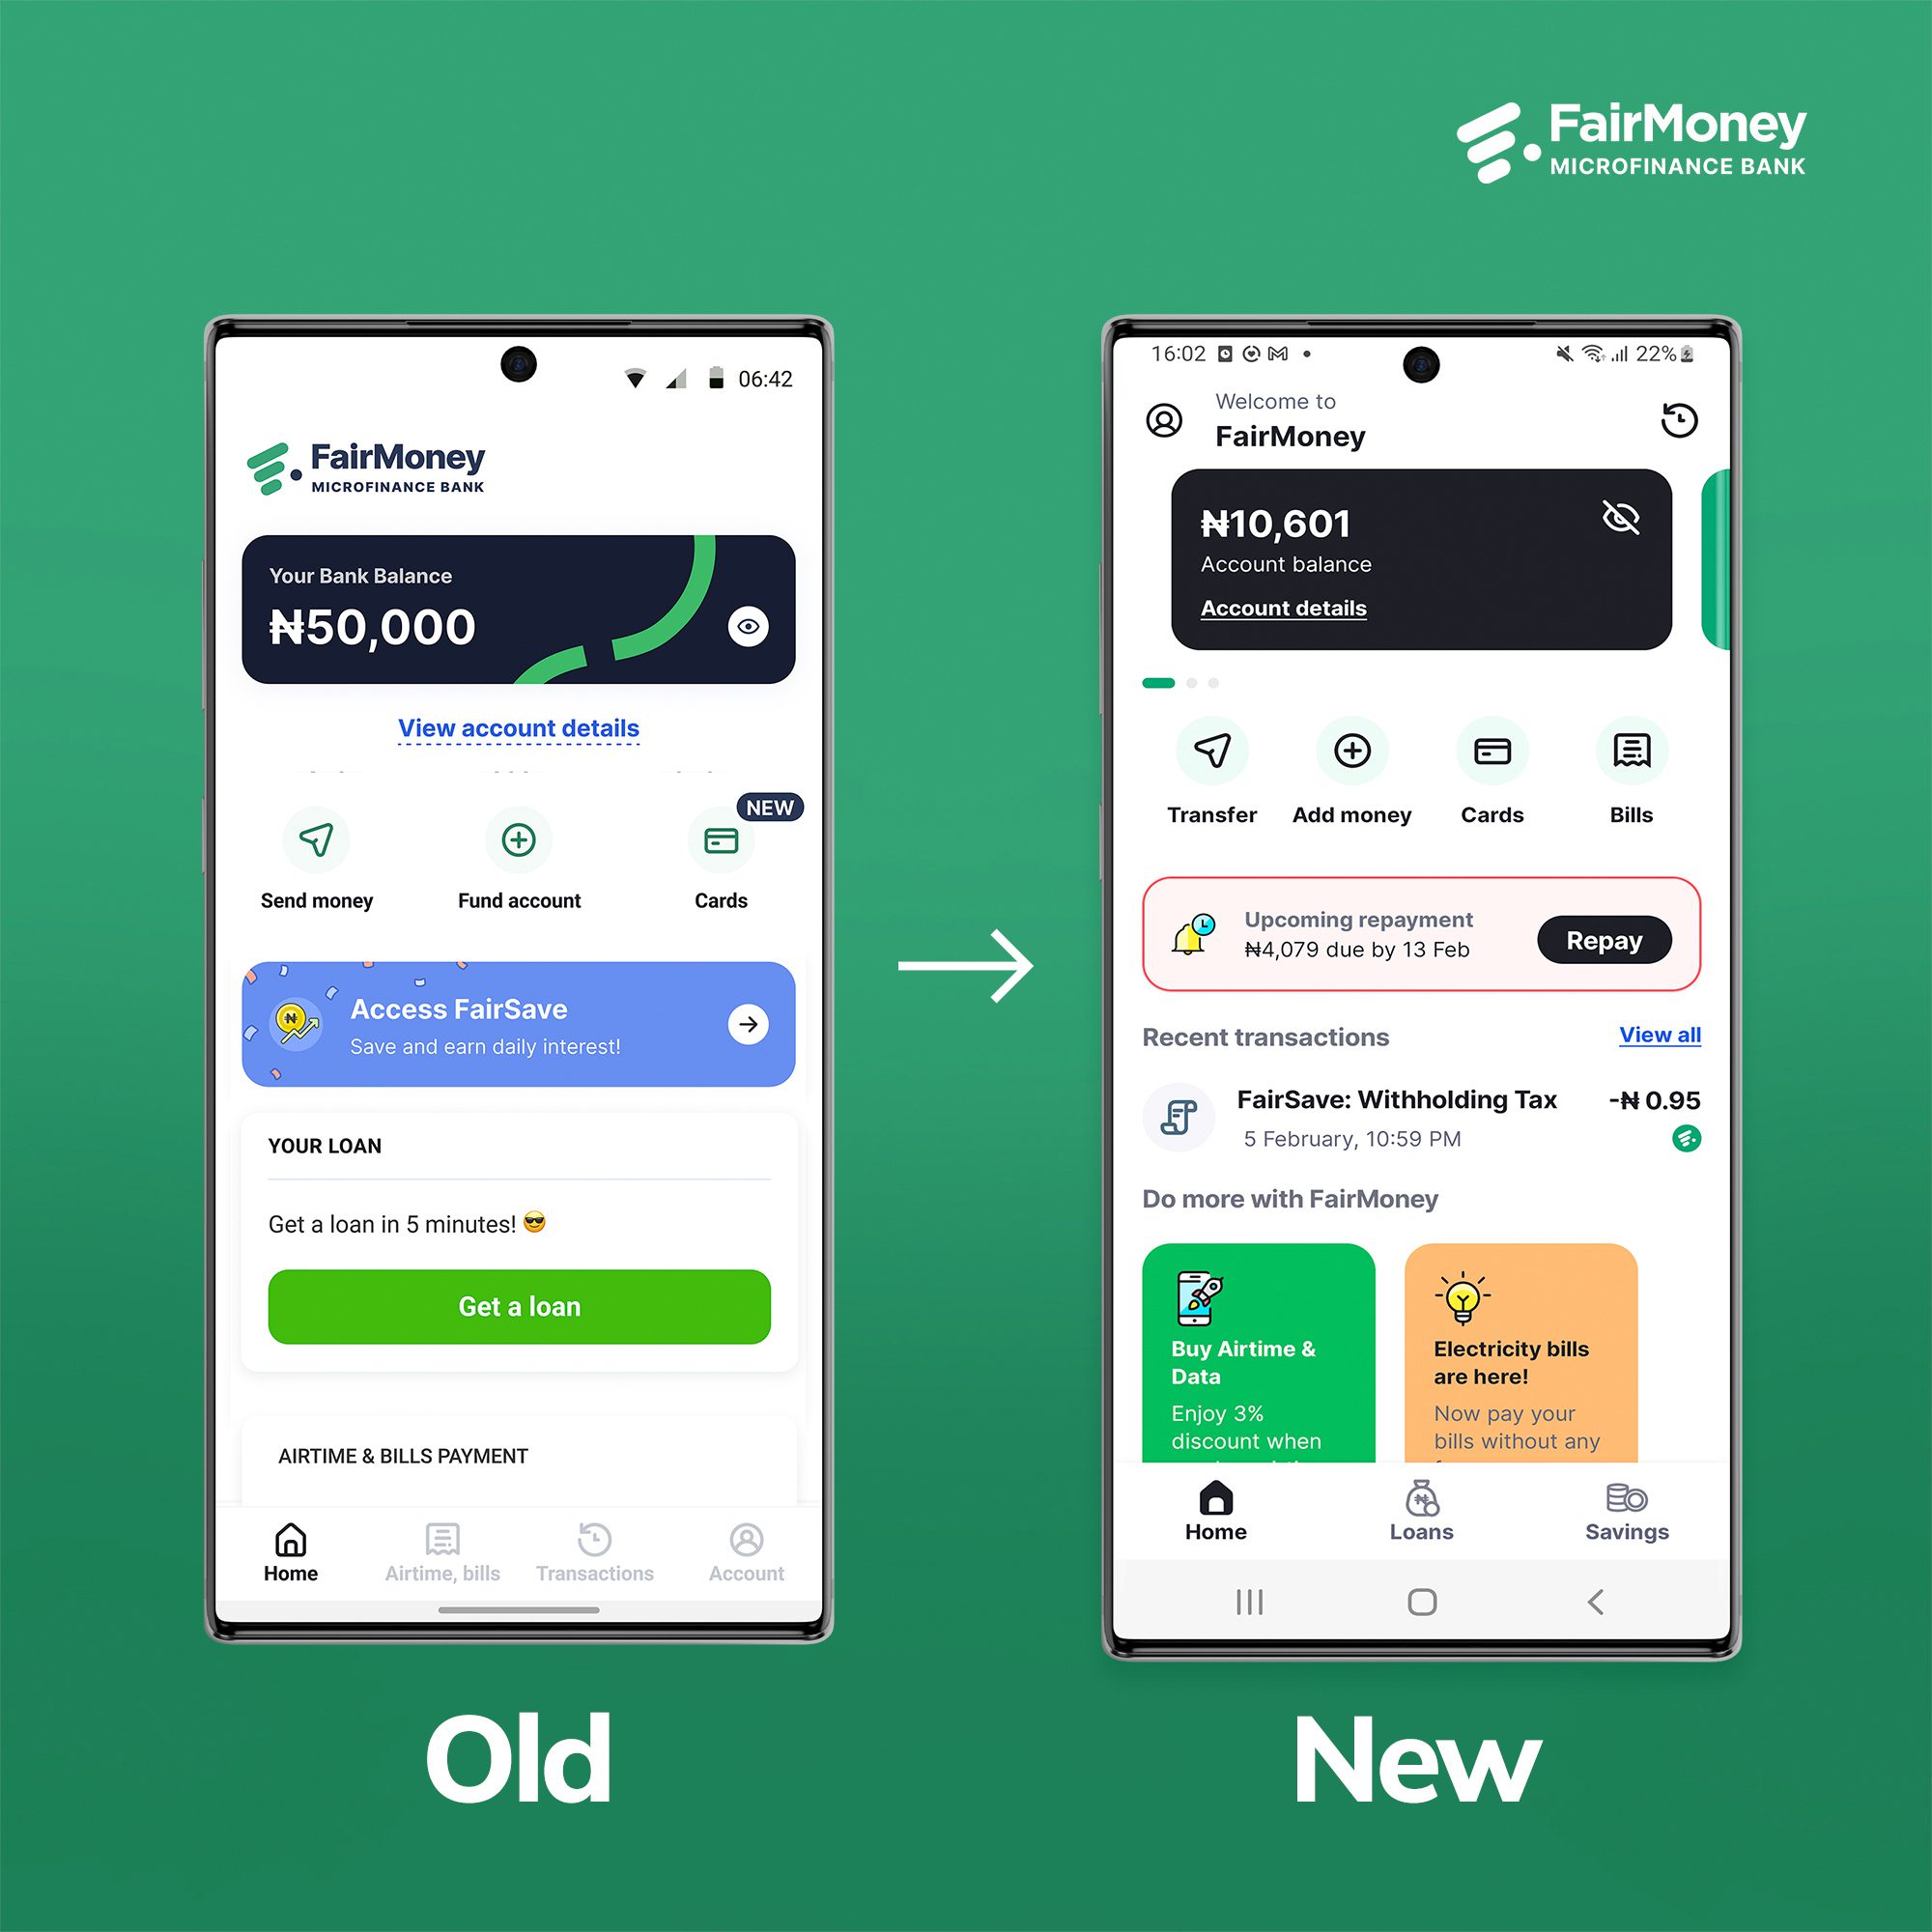 The revamped FairMoney App sets the pace for seamless banking transactions in Nigeria 